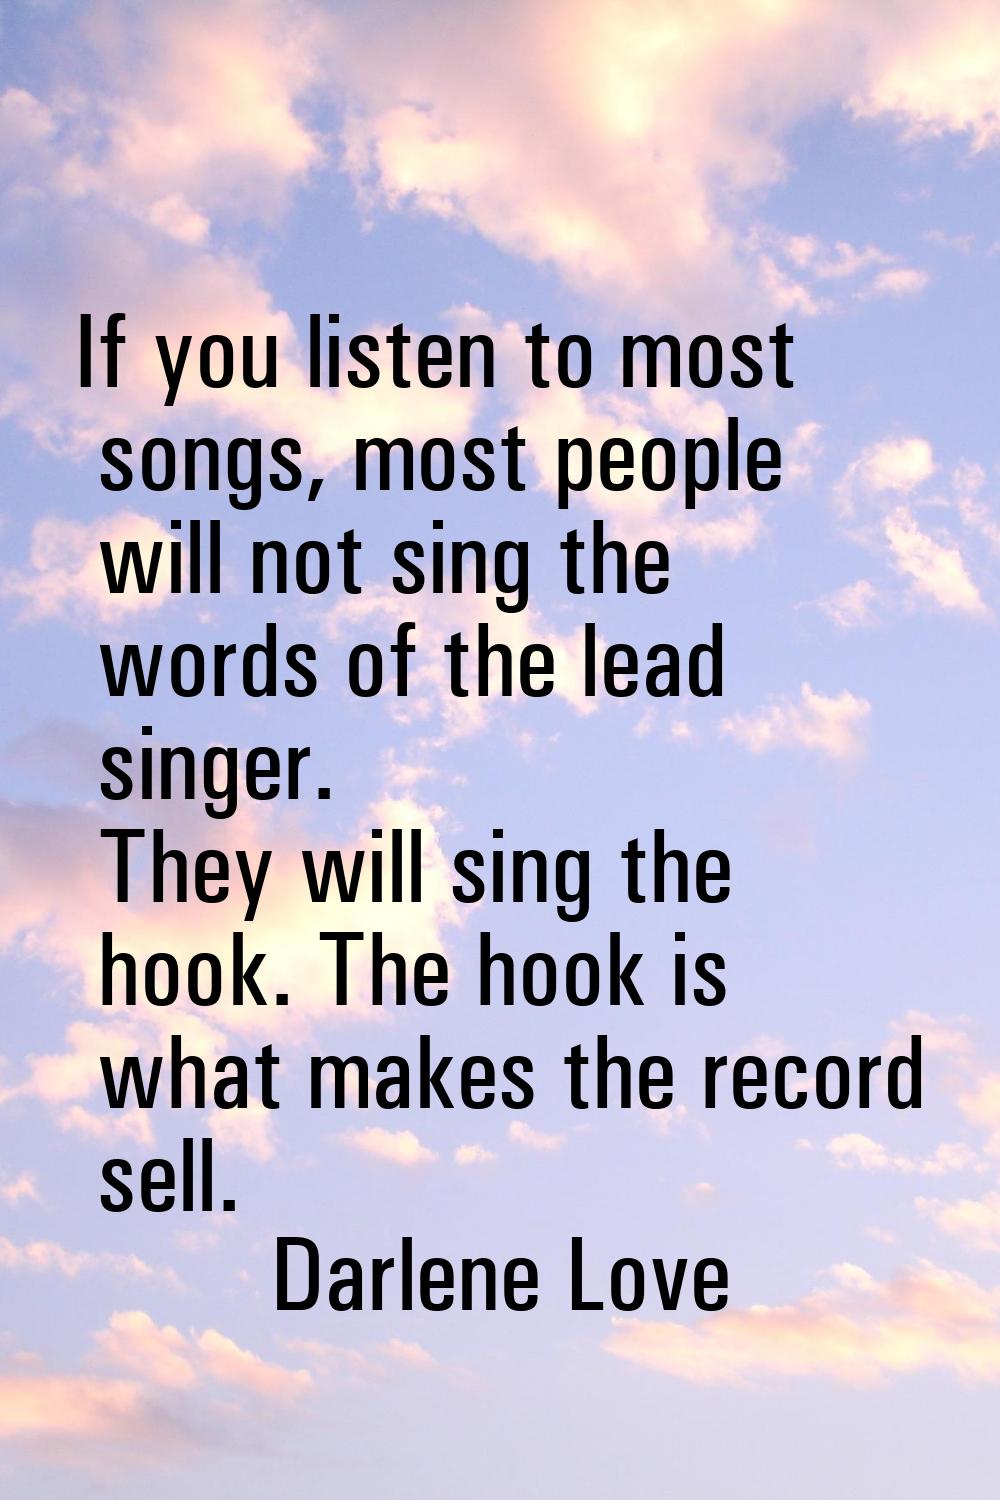 If you listen to most songs, most people will not sing the words of the lead singer. They will sing